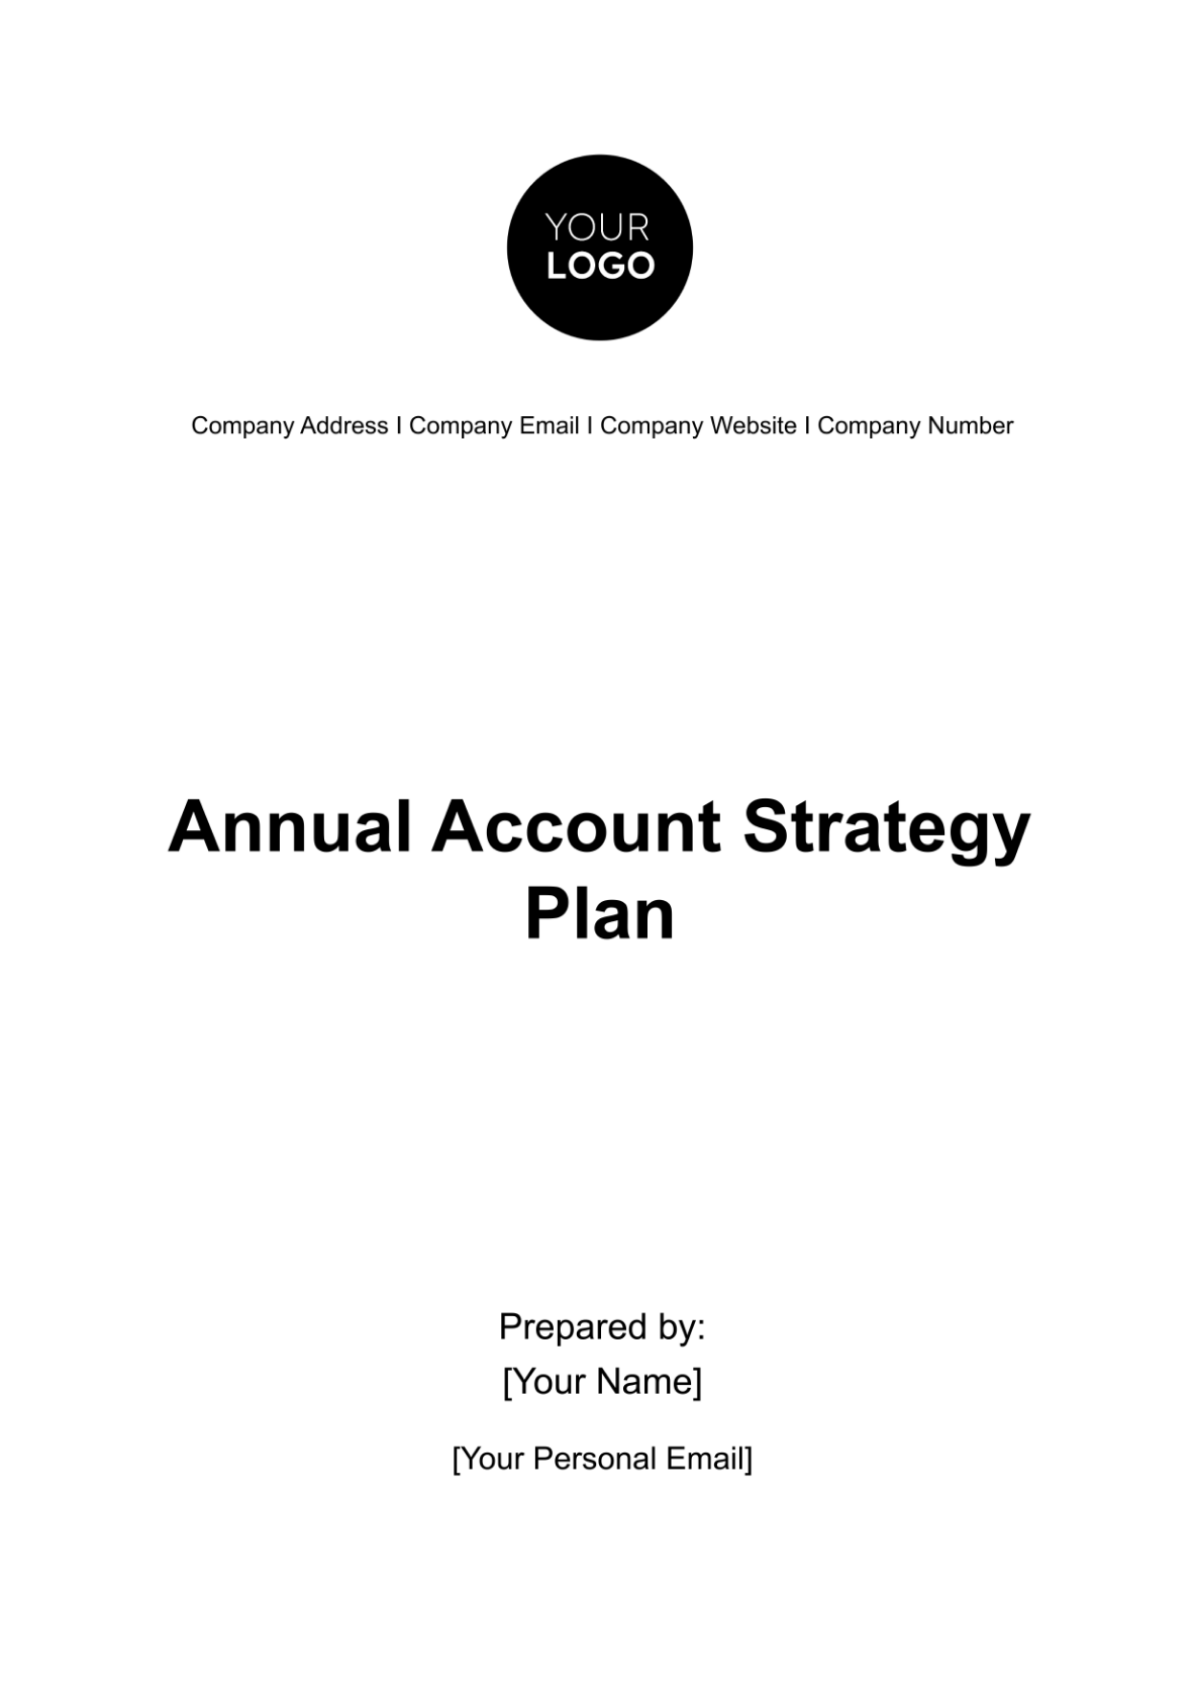 Annual Account Strategy Plan Template